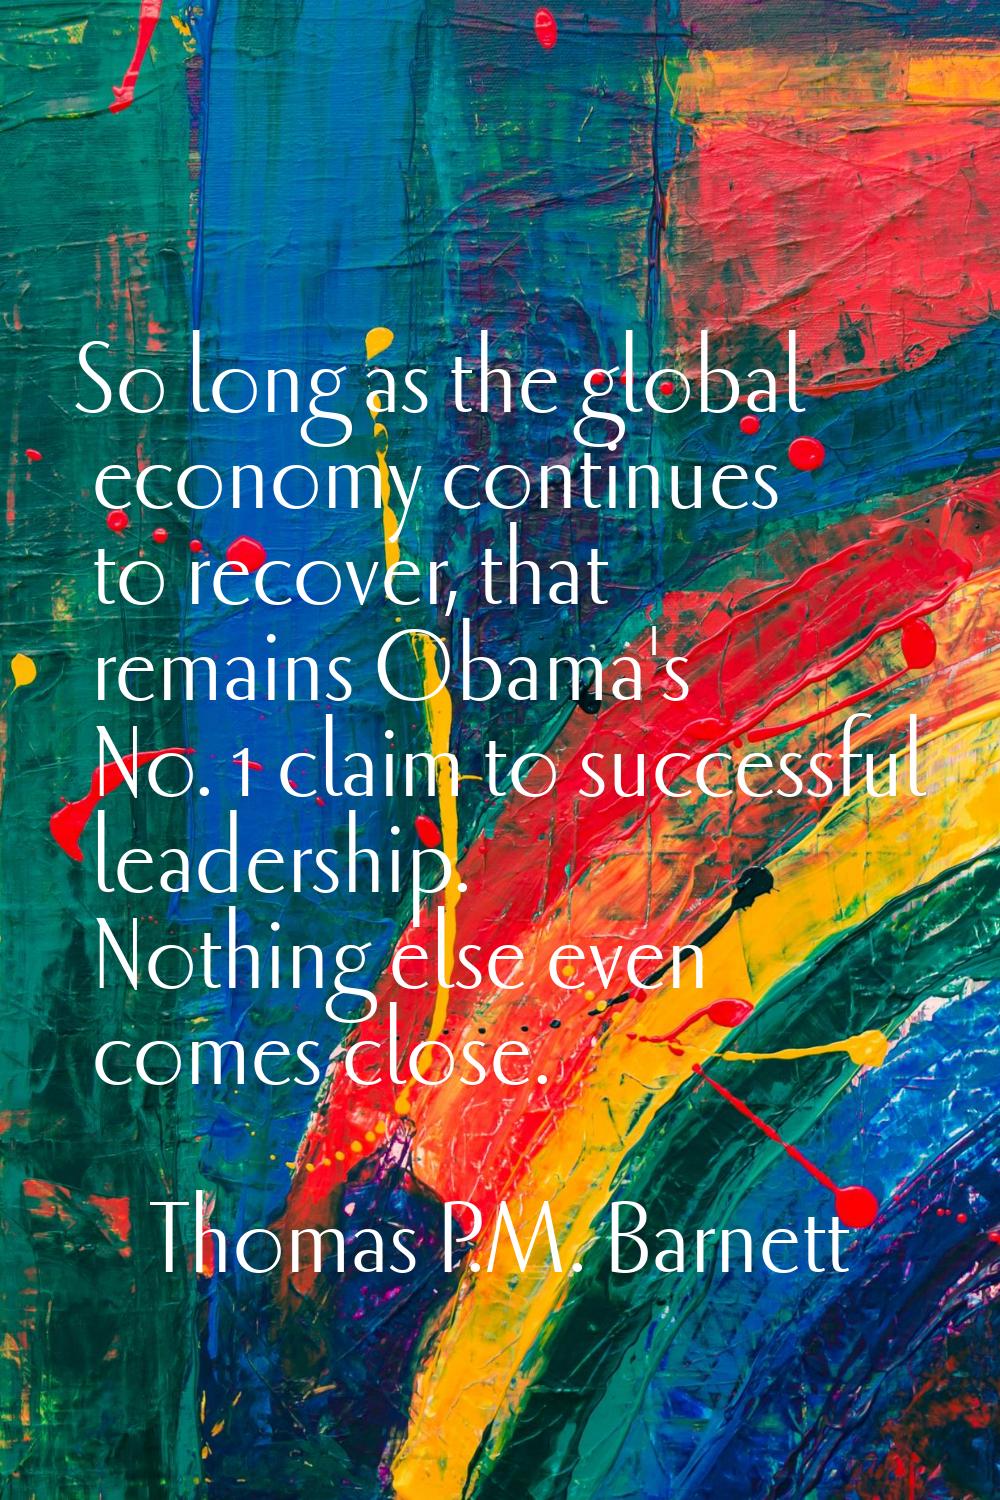 So long as the global economy continues to recover, that remains Obama's No. 1 claim to successful 